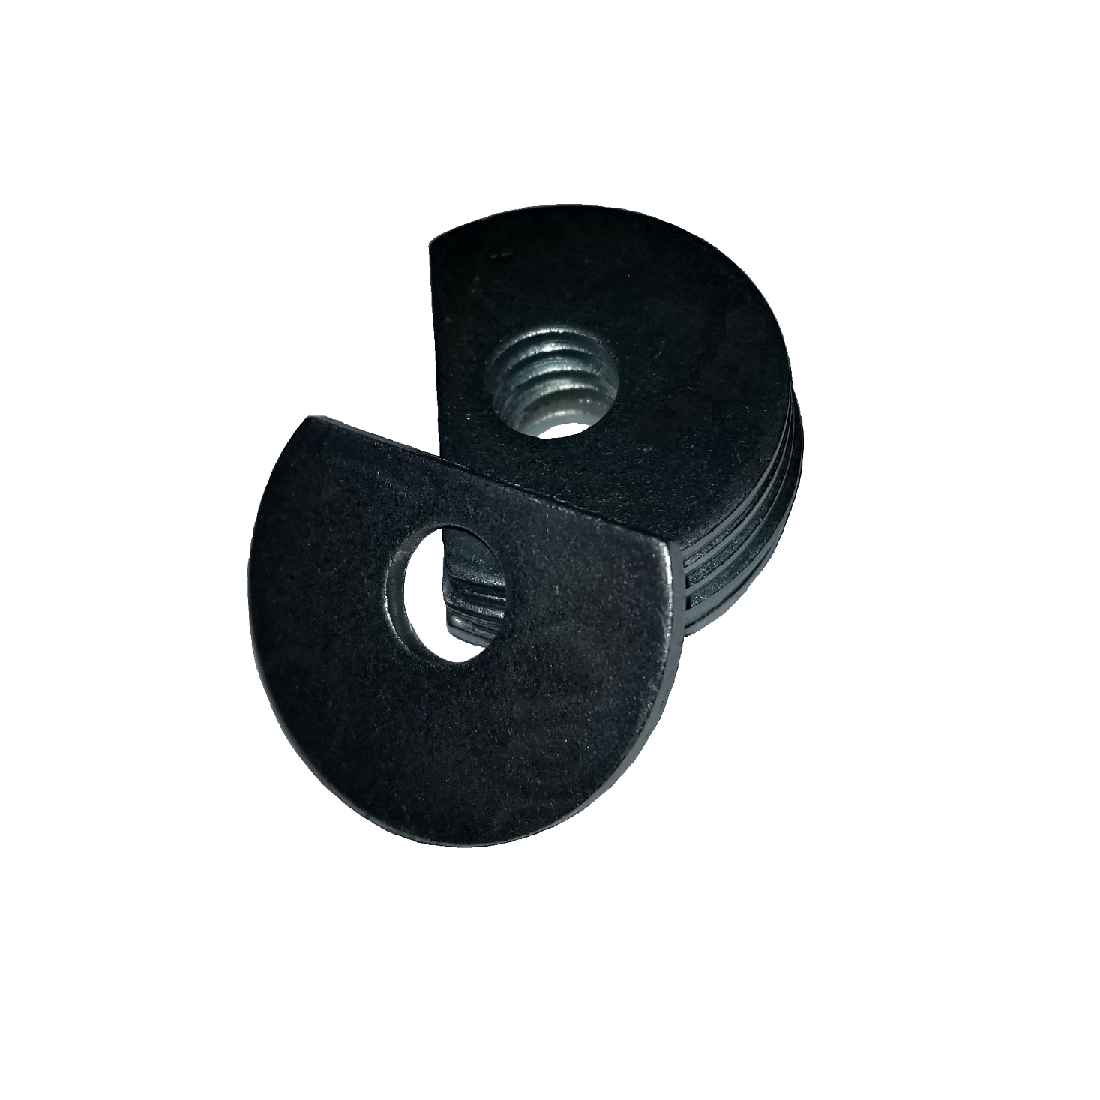 Clipped OD Washer - 0.312 ID, 2.000 OD, 0.125 Thick, Low Carbon Steel - Soft, Zinc & Clear